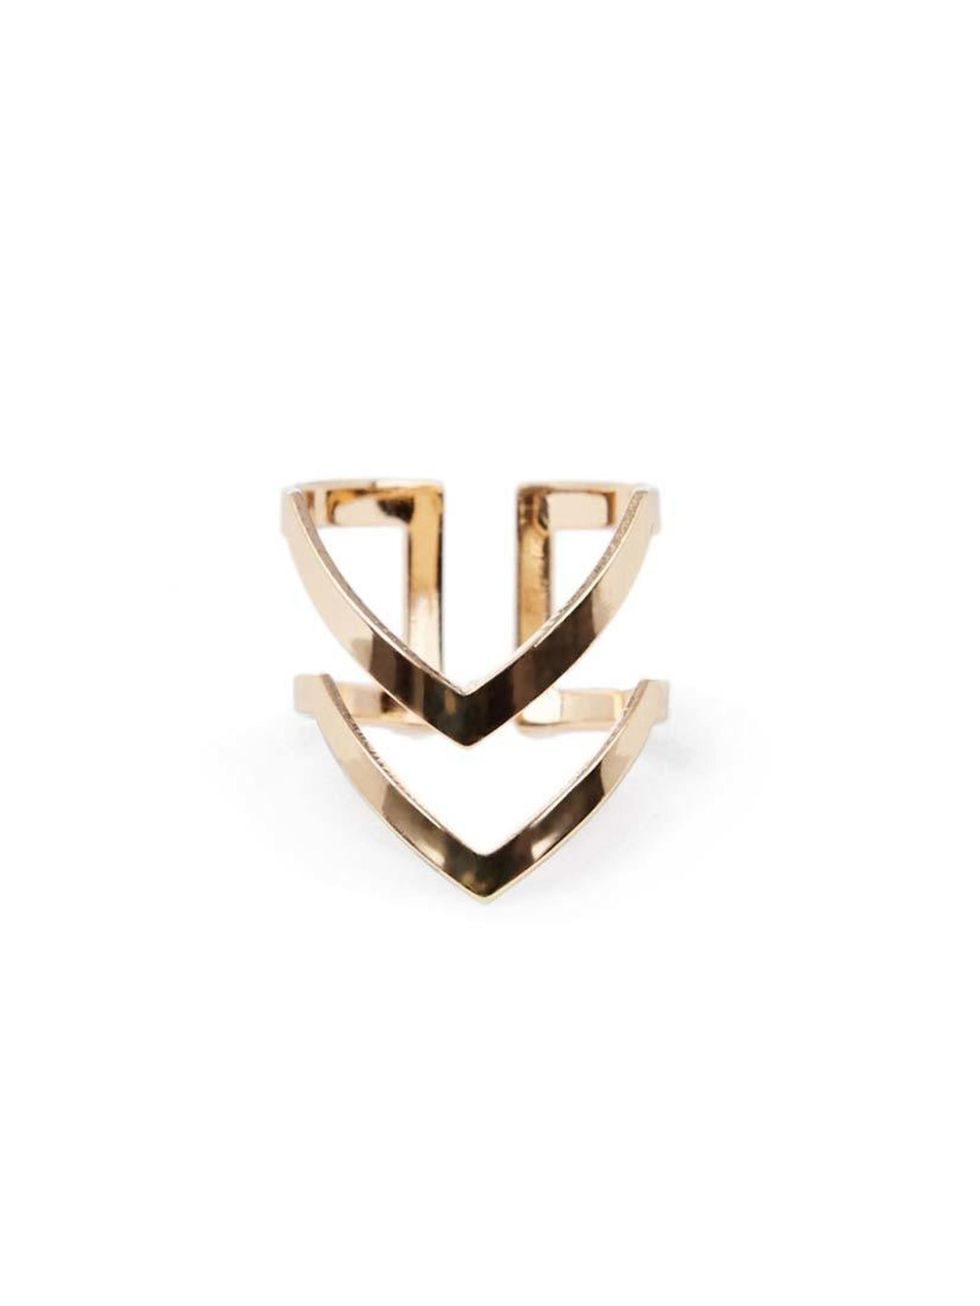 <p>This chevron ring is on Acting Commissioning Editor Georgia Simmonds' shopping list.</p>

<p><a href="http://www.warehouse.co.uk/double-cheuron-open-ring/all/warehouse/fcp-product/02248090" target="_blank">Warehouse</a> ring, £8</p>